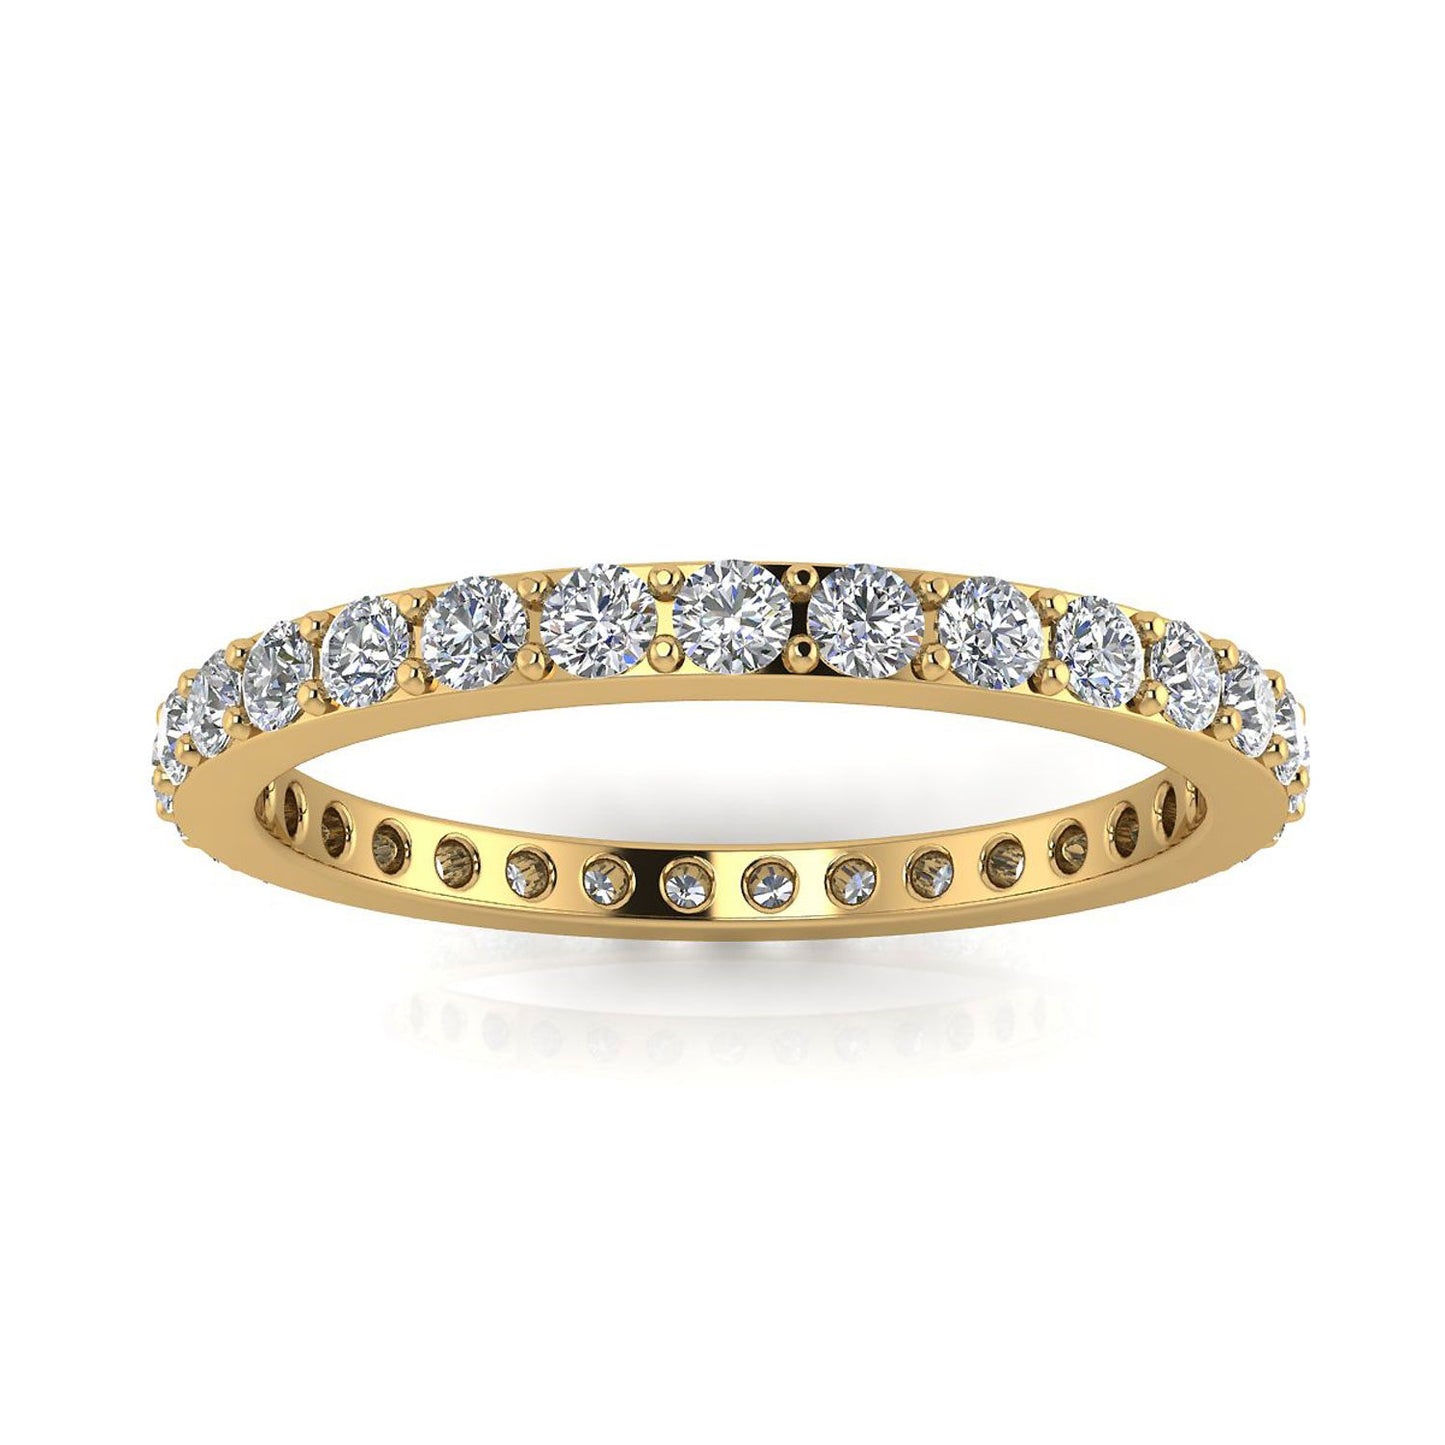 Round Brilliant Cut Diamond Pave Set Eternity Ring In 18k Yellow Gold  (0.5ct. Tw.) Ring Size 8